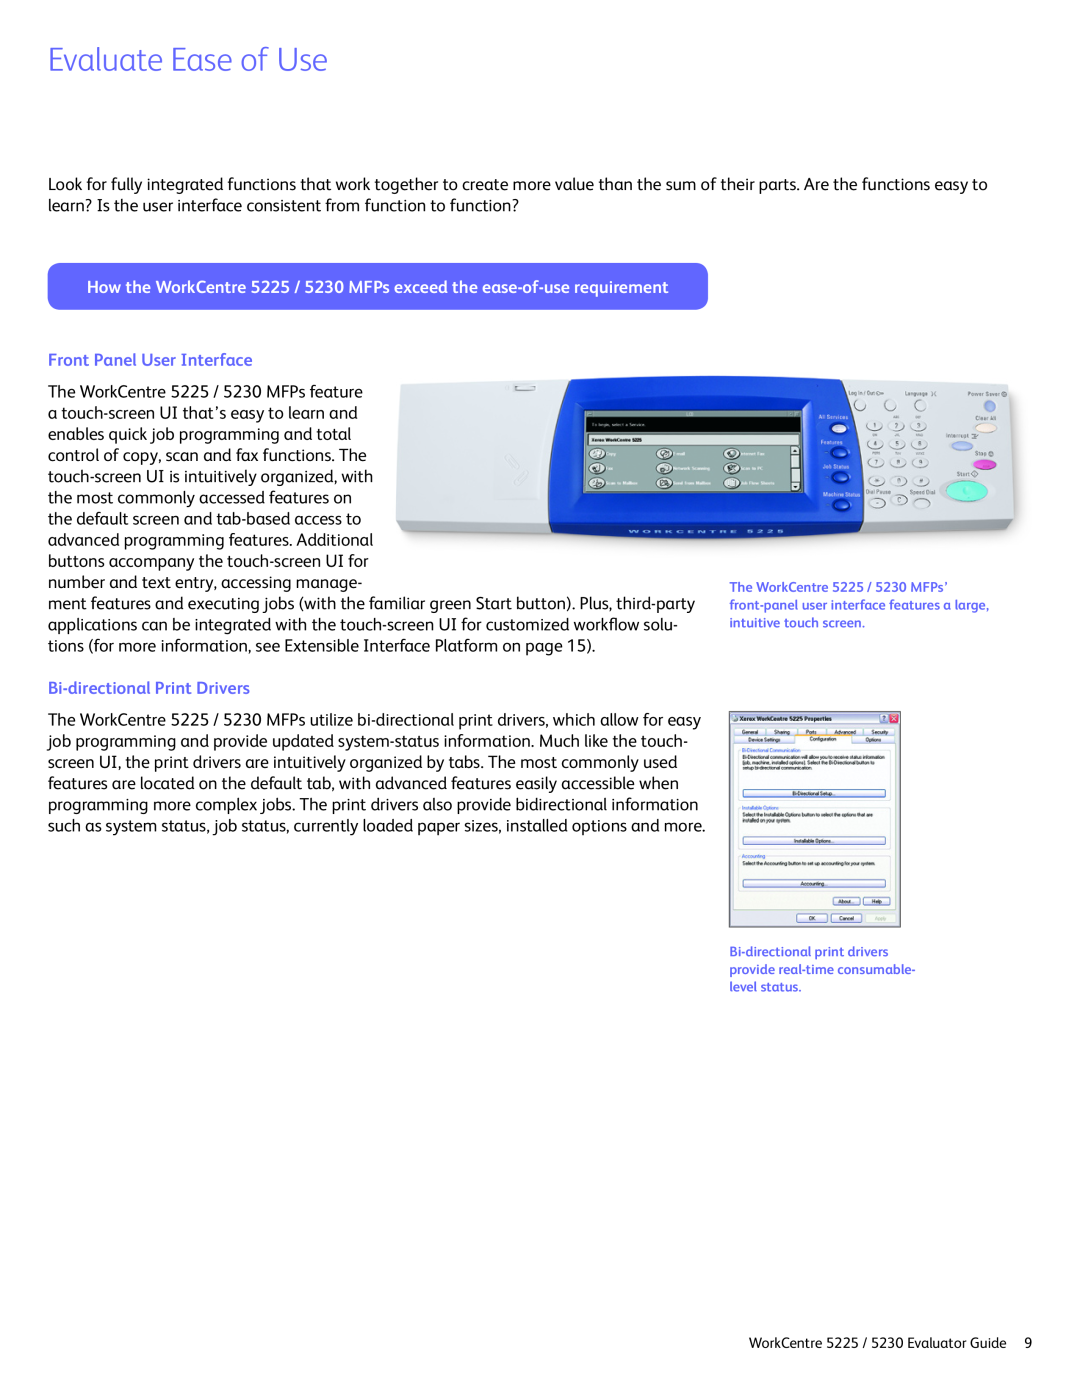 Xerox 5225 manual Evaluate Ease of Use, Front Panel User Interface, Bi-directionalPrint Drivers 